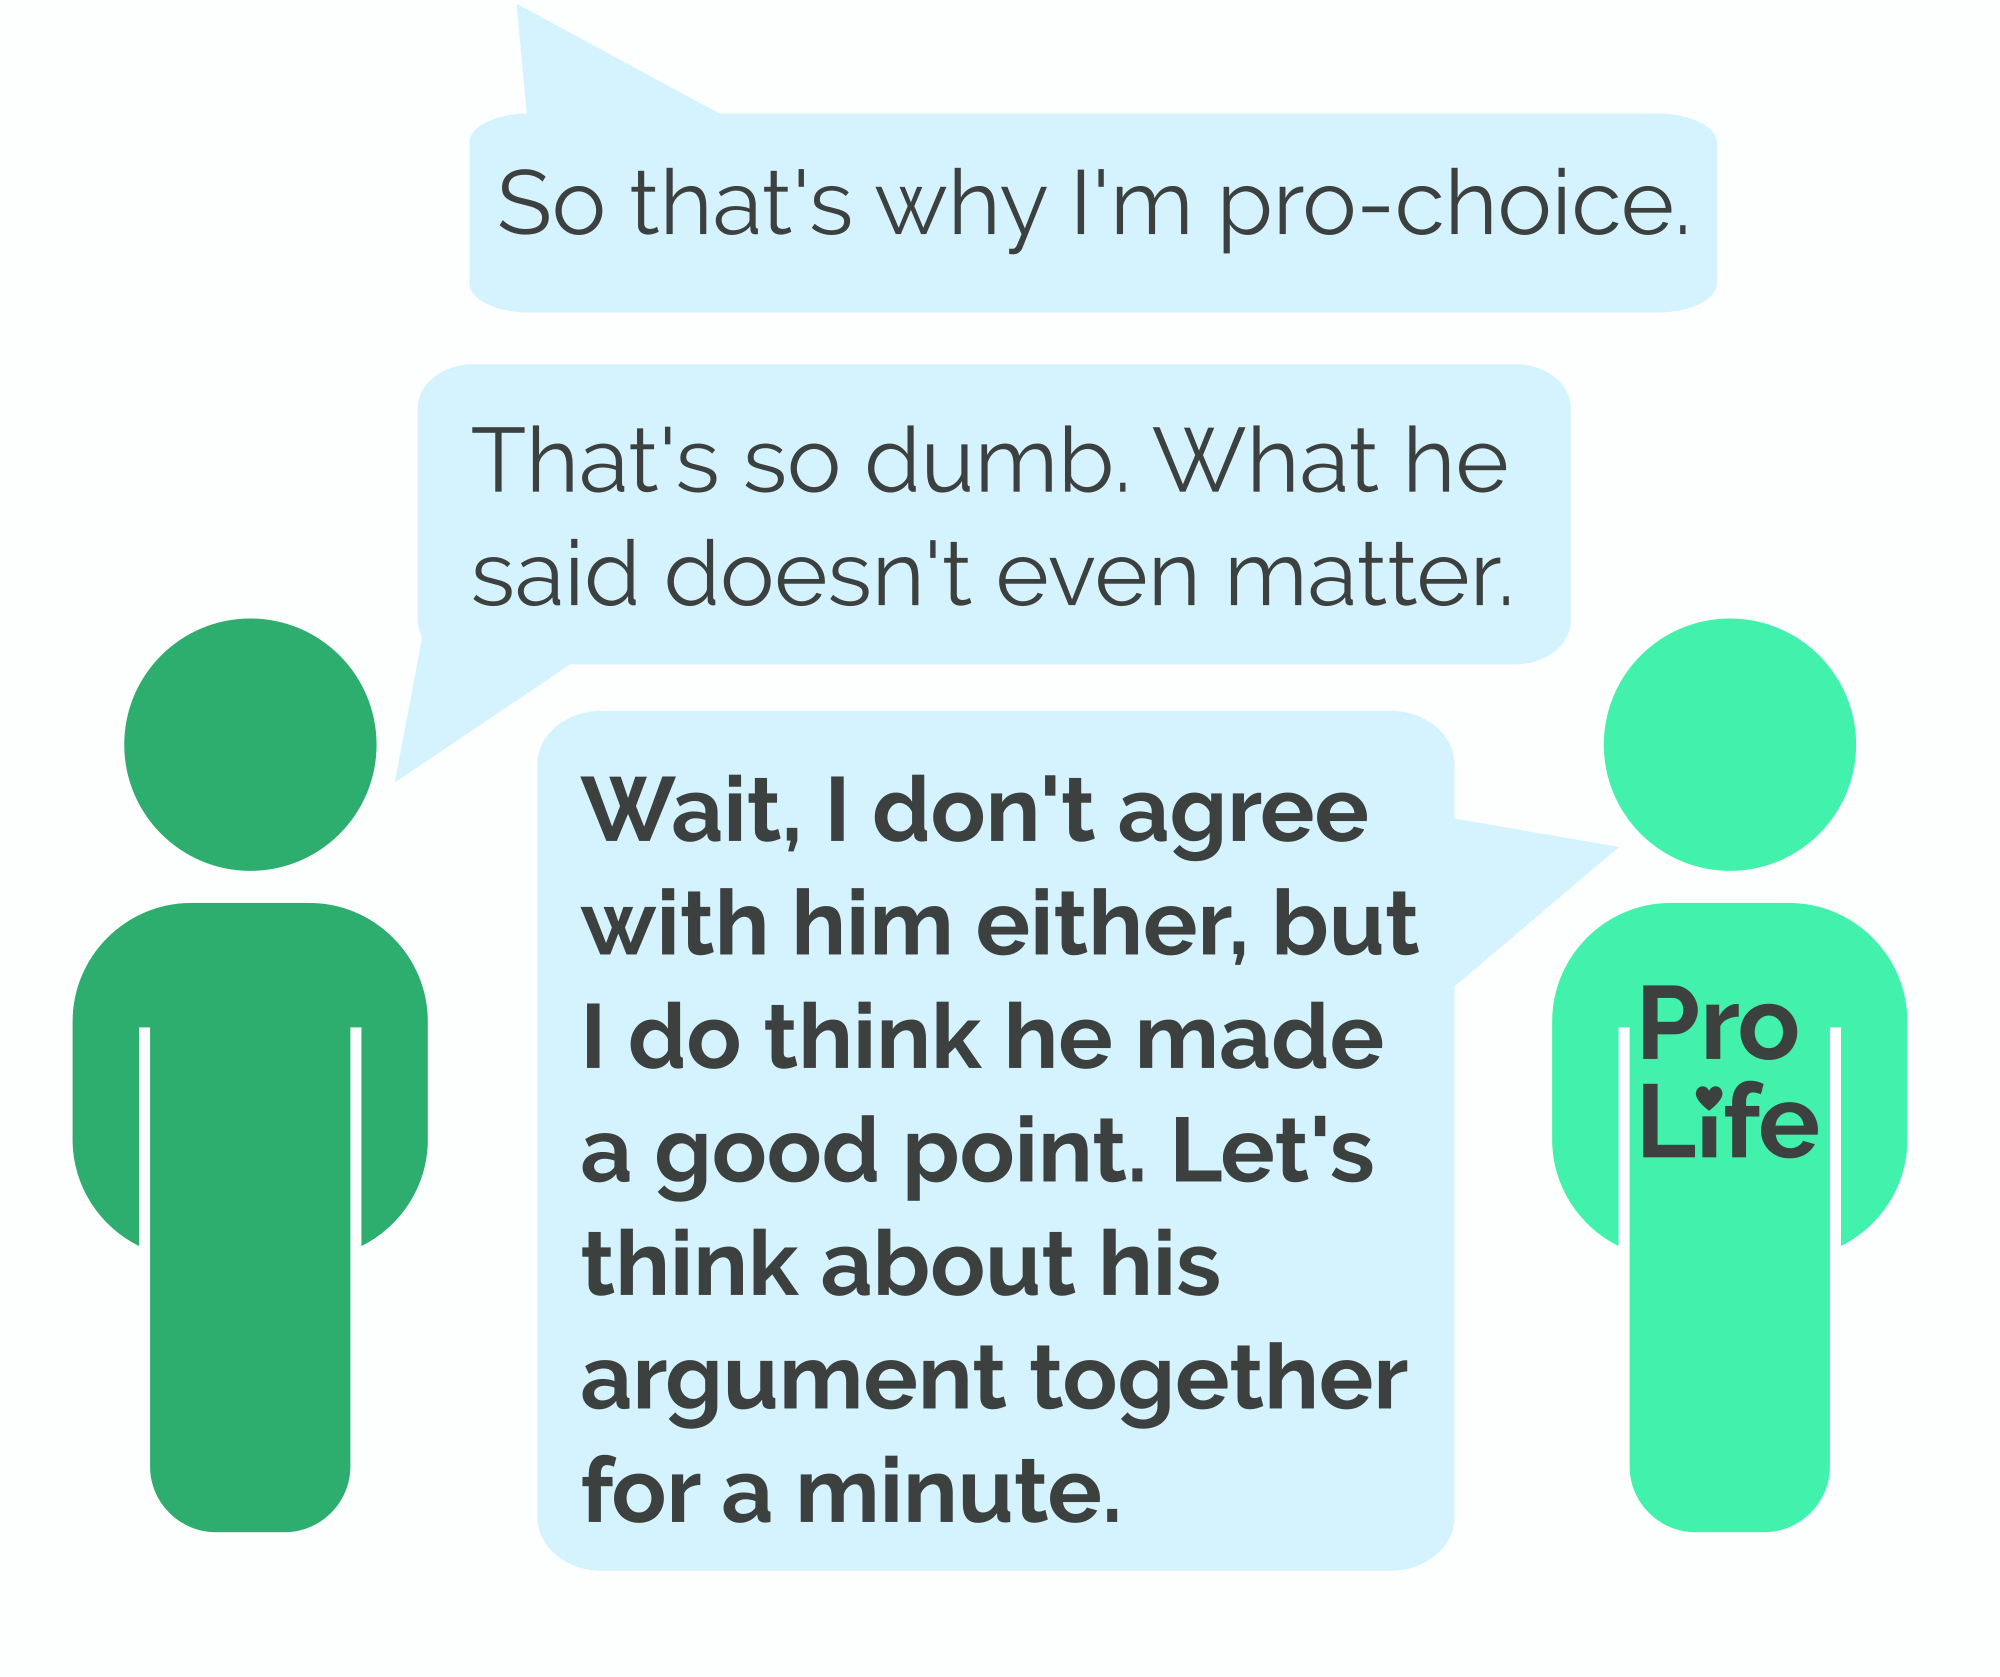 Person 1: So that’s why I’m pro-choice. Person 2: That’s so dumb. What he said doesn’t even matter. Person 3 (our hero): Wait, I don’t agree with him either, but I do think he made a good point. Let’s think about his argument together for a minute.